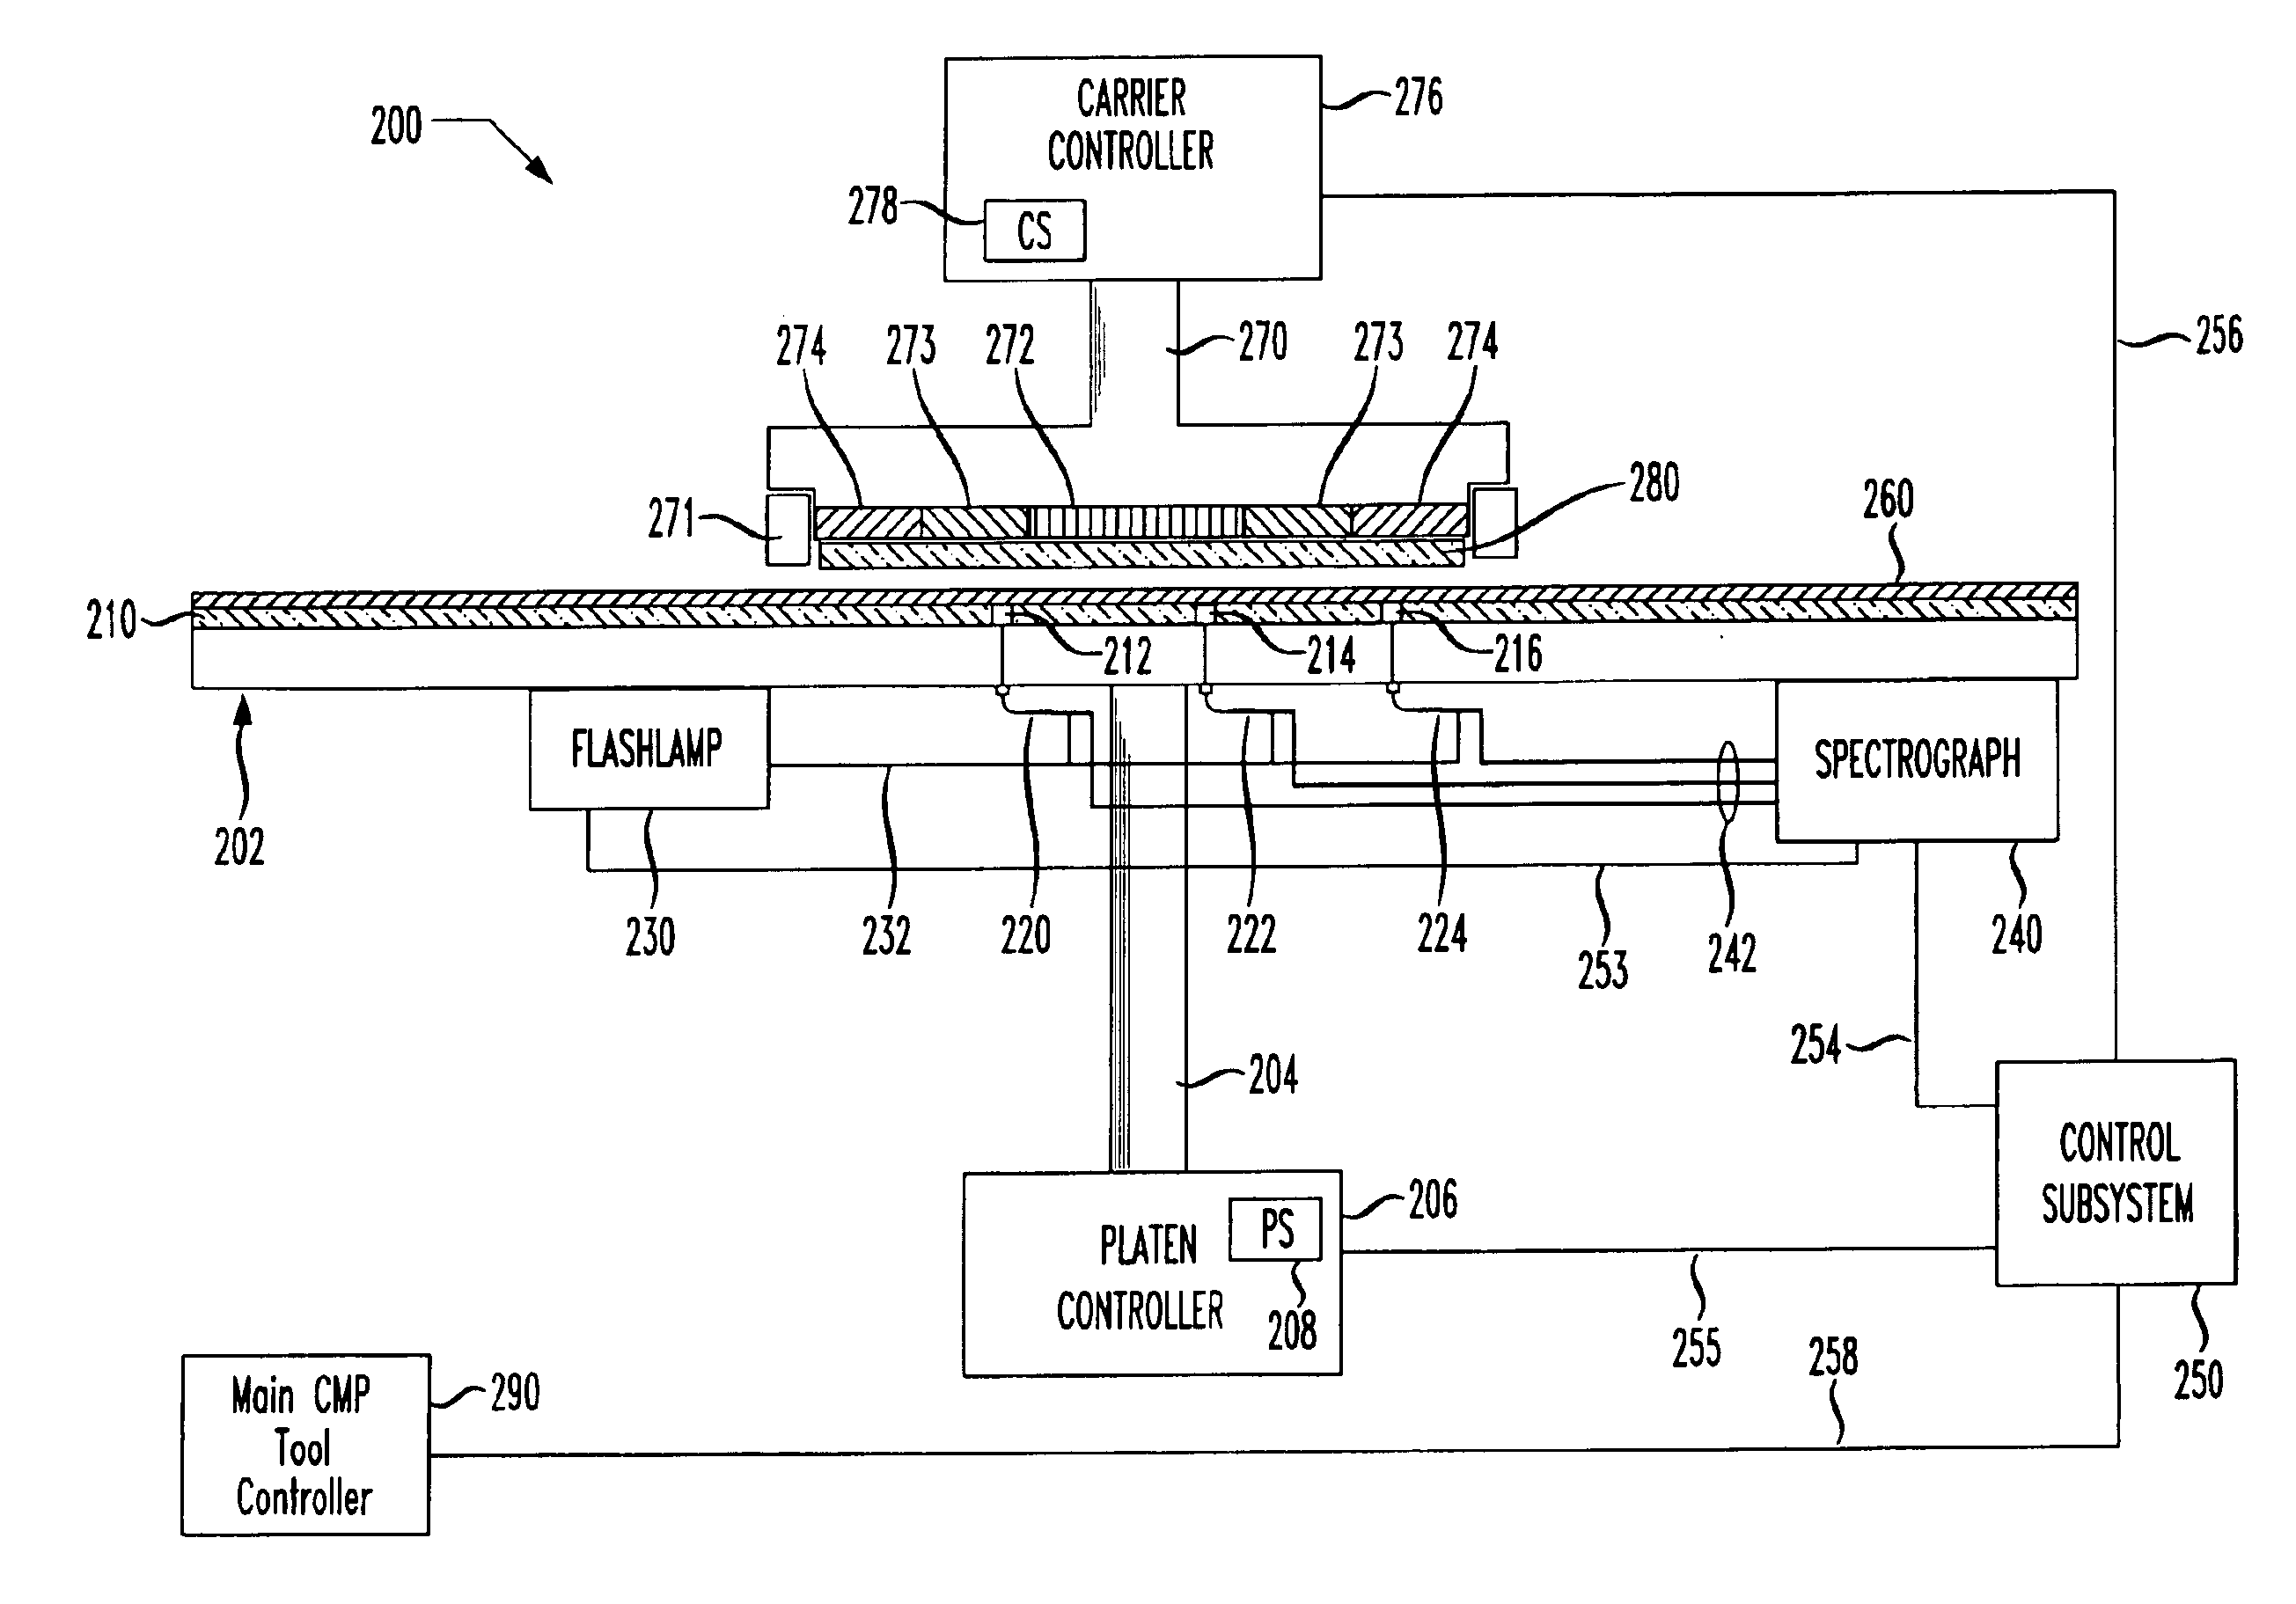 Optical closed-loop control system for a CMP apparatus and method of manufacture thereof